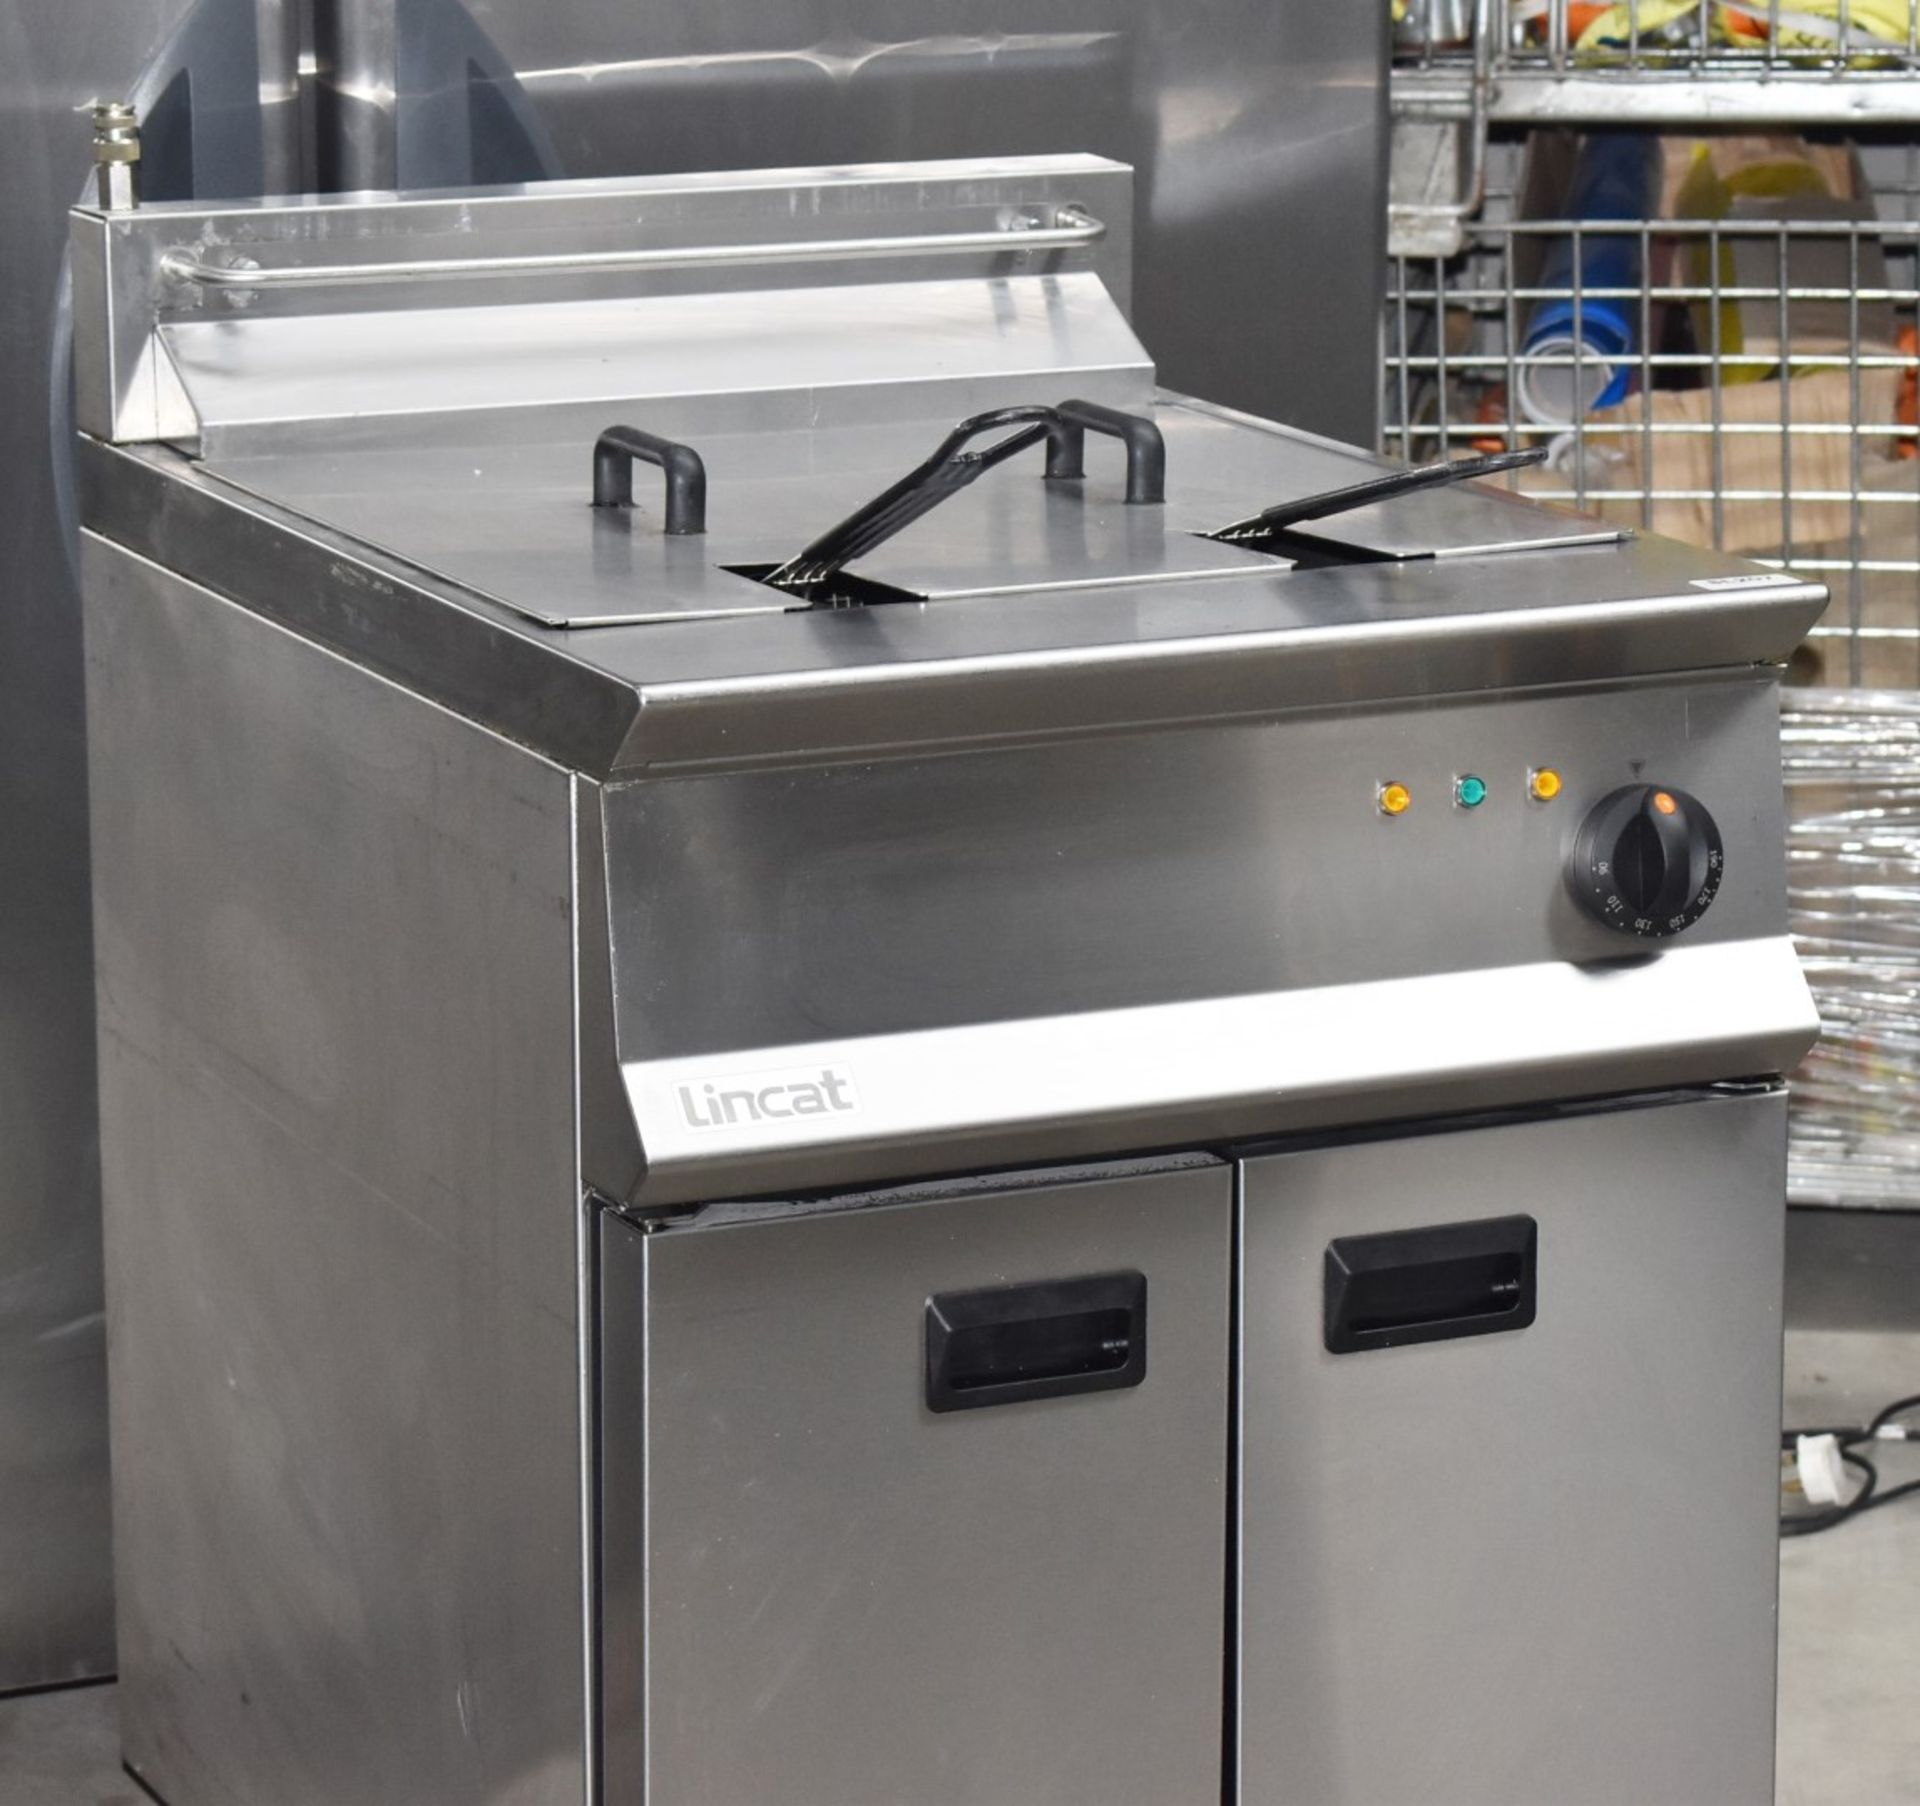 1 x Lincat Opus 800 OE8108 Single Tank Electric Fryer With Filtration - 37L Tank With Two - Image 2 of 17